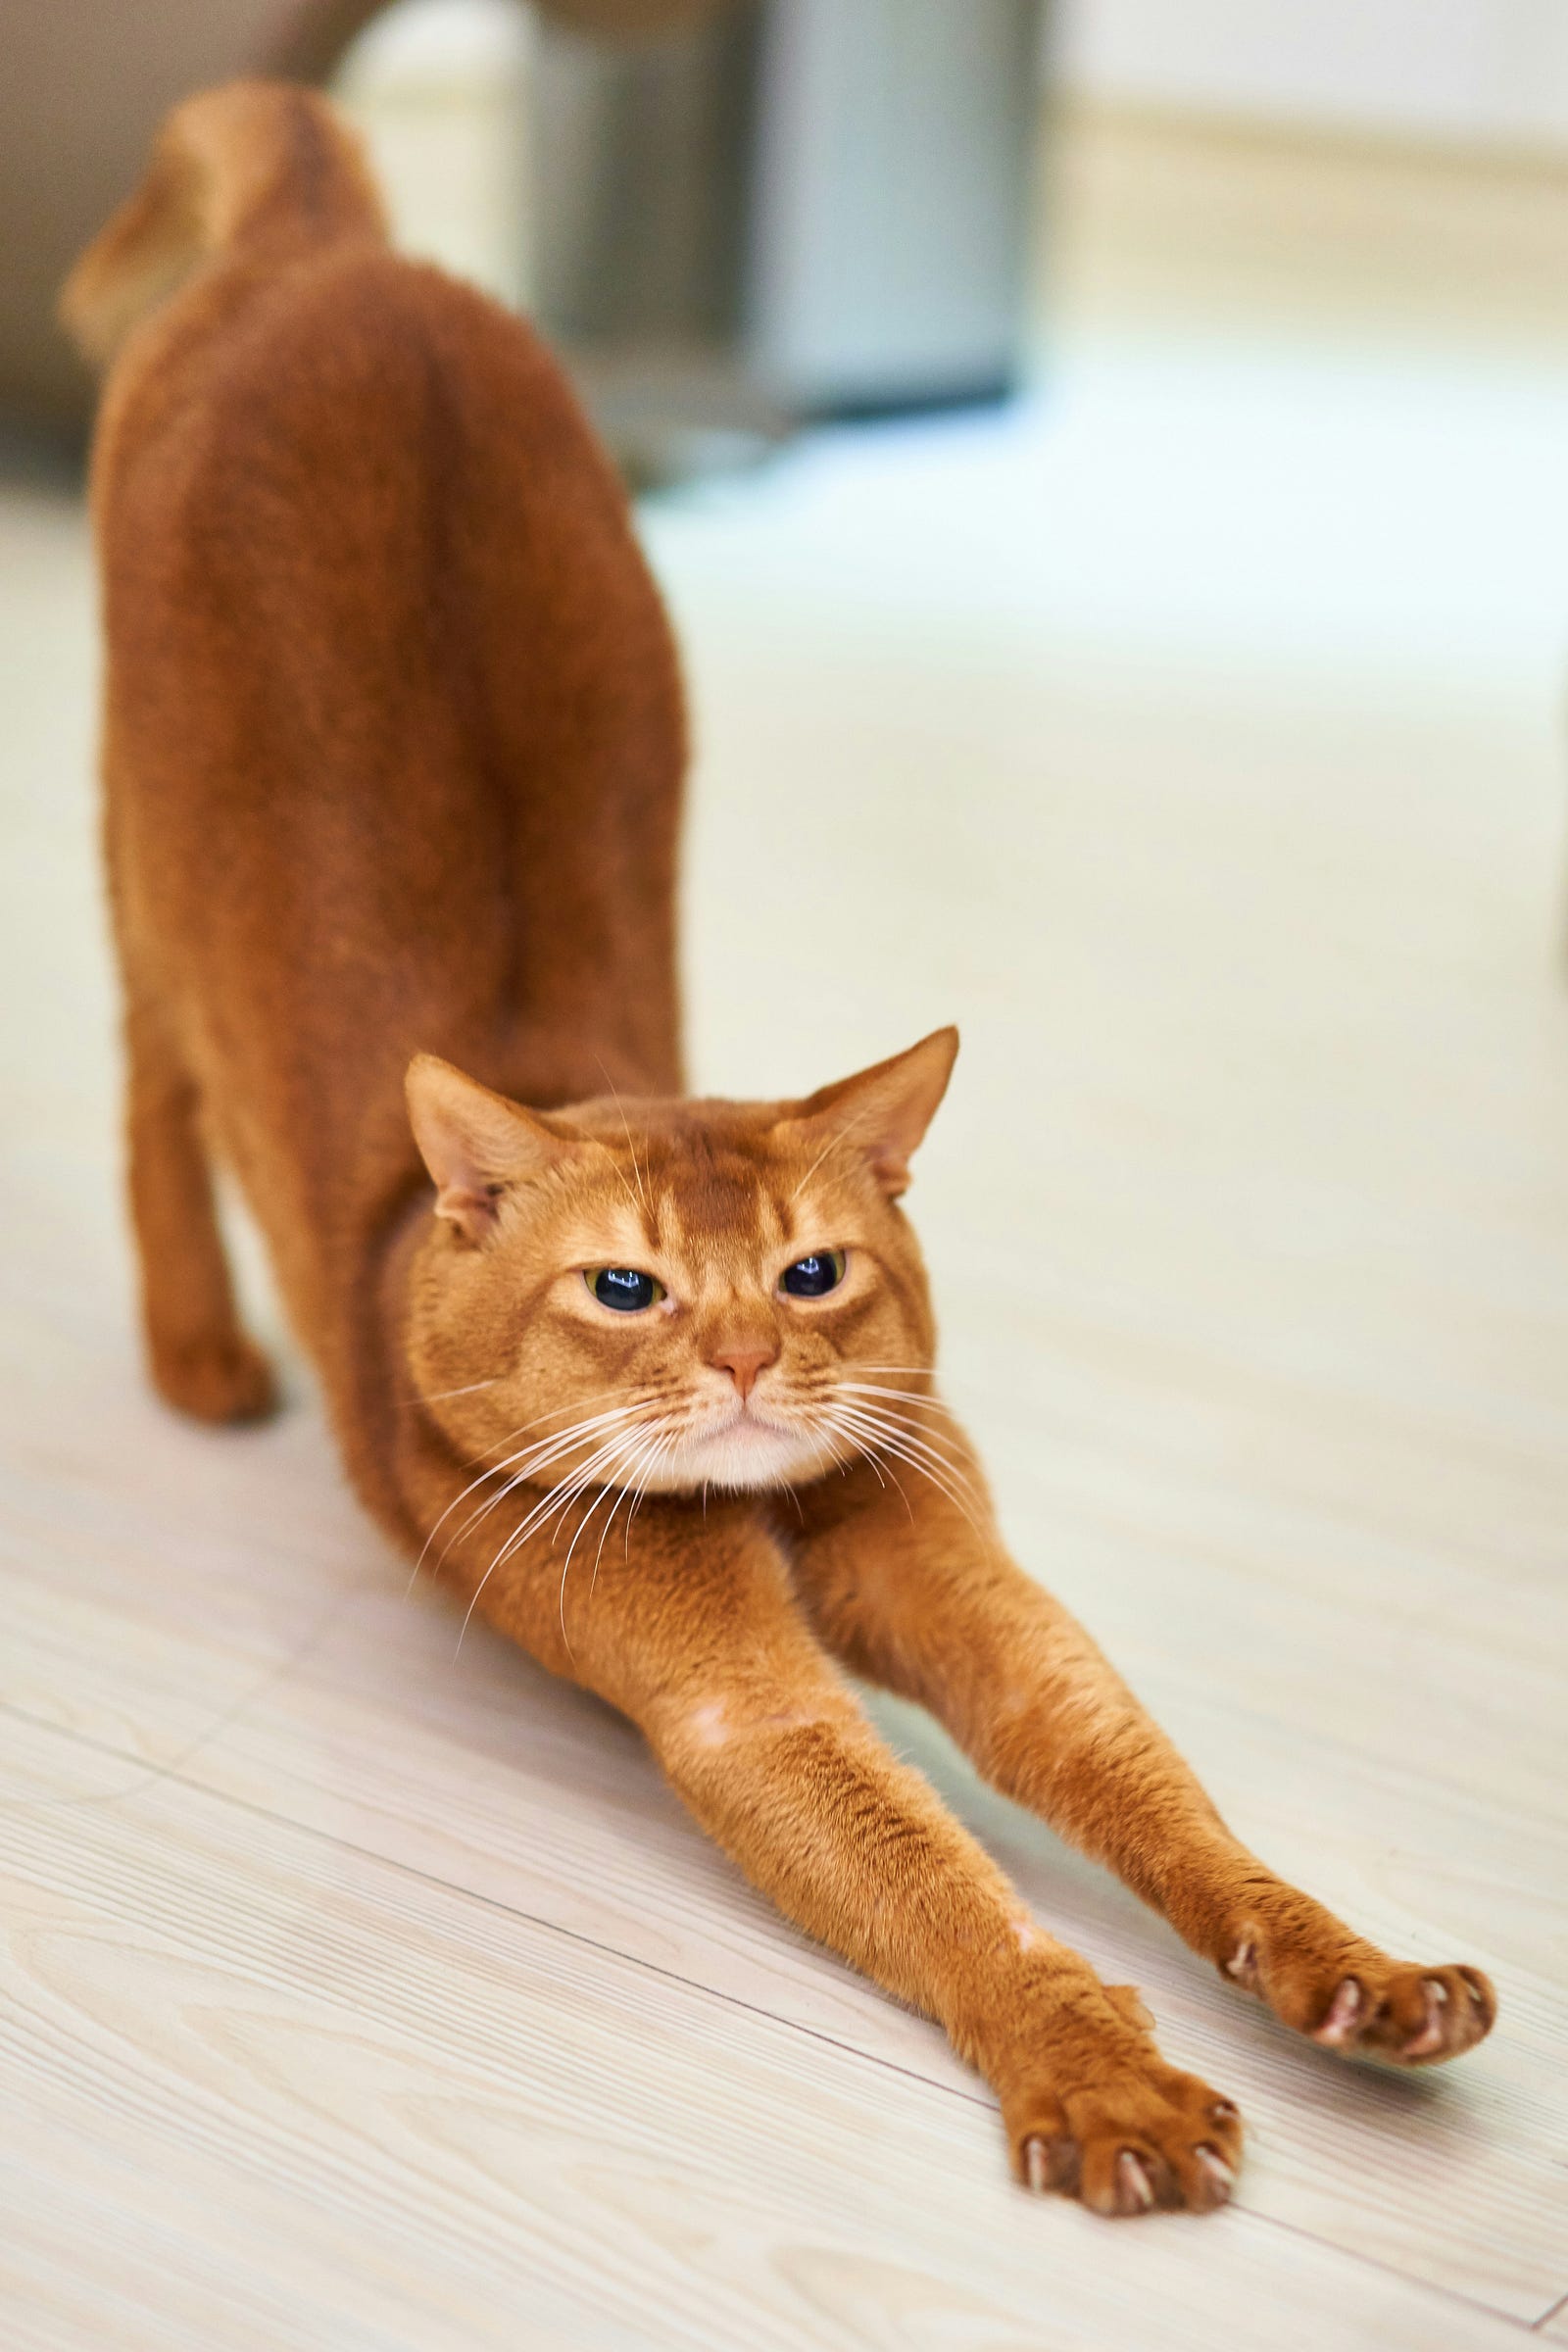 An orange cat arches its back as it stretches.